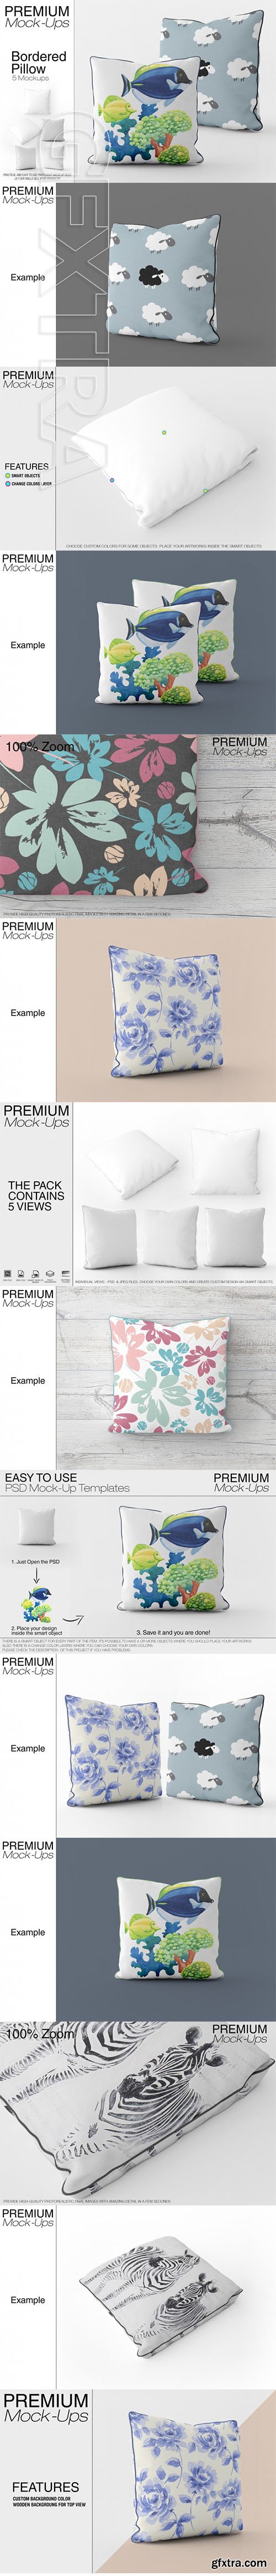 Bordered Square Pillow Mockup Pack